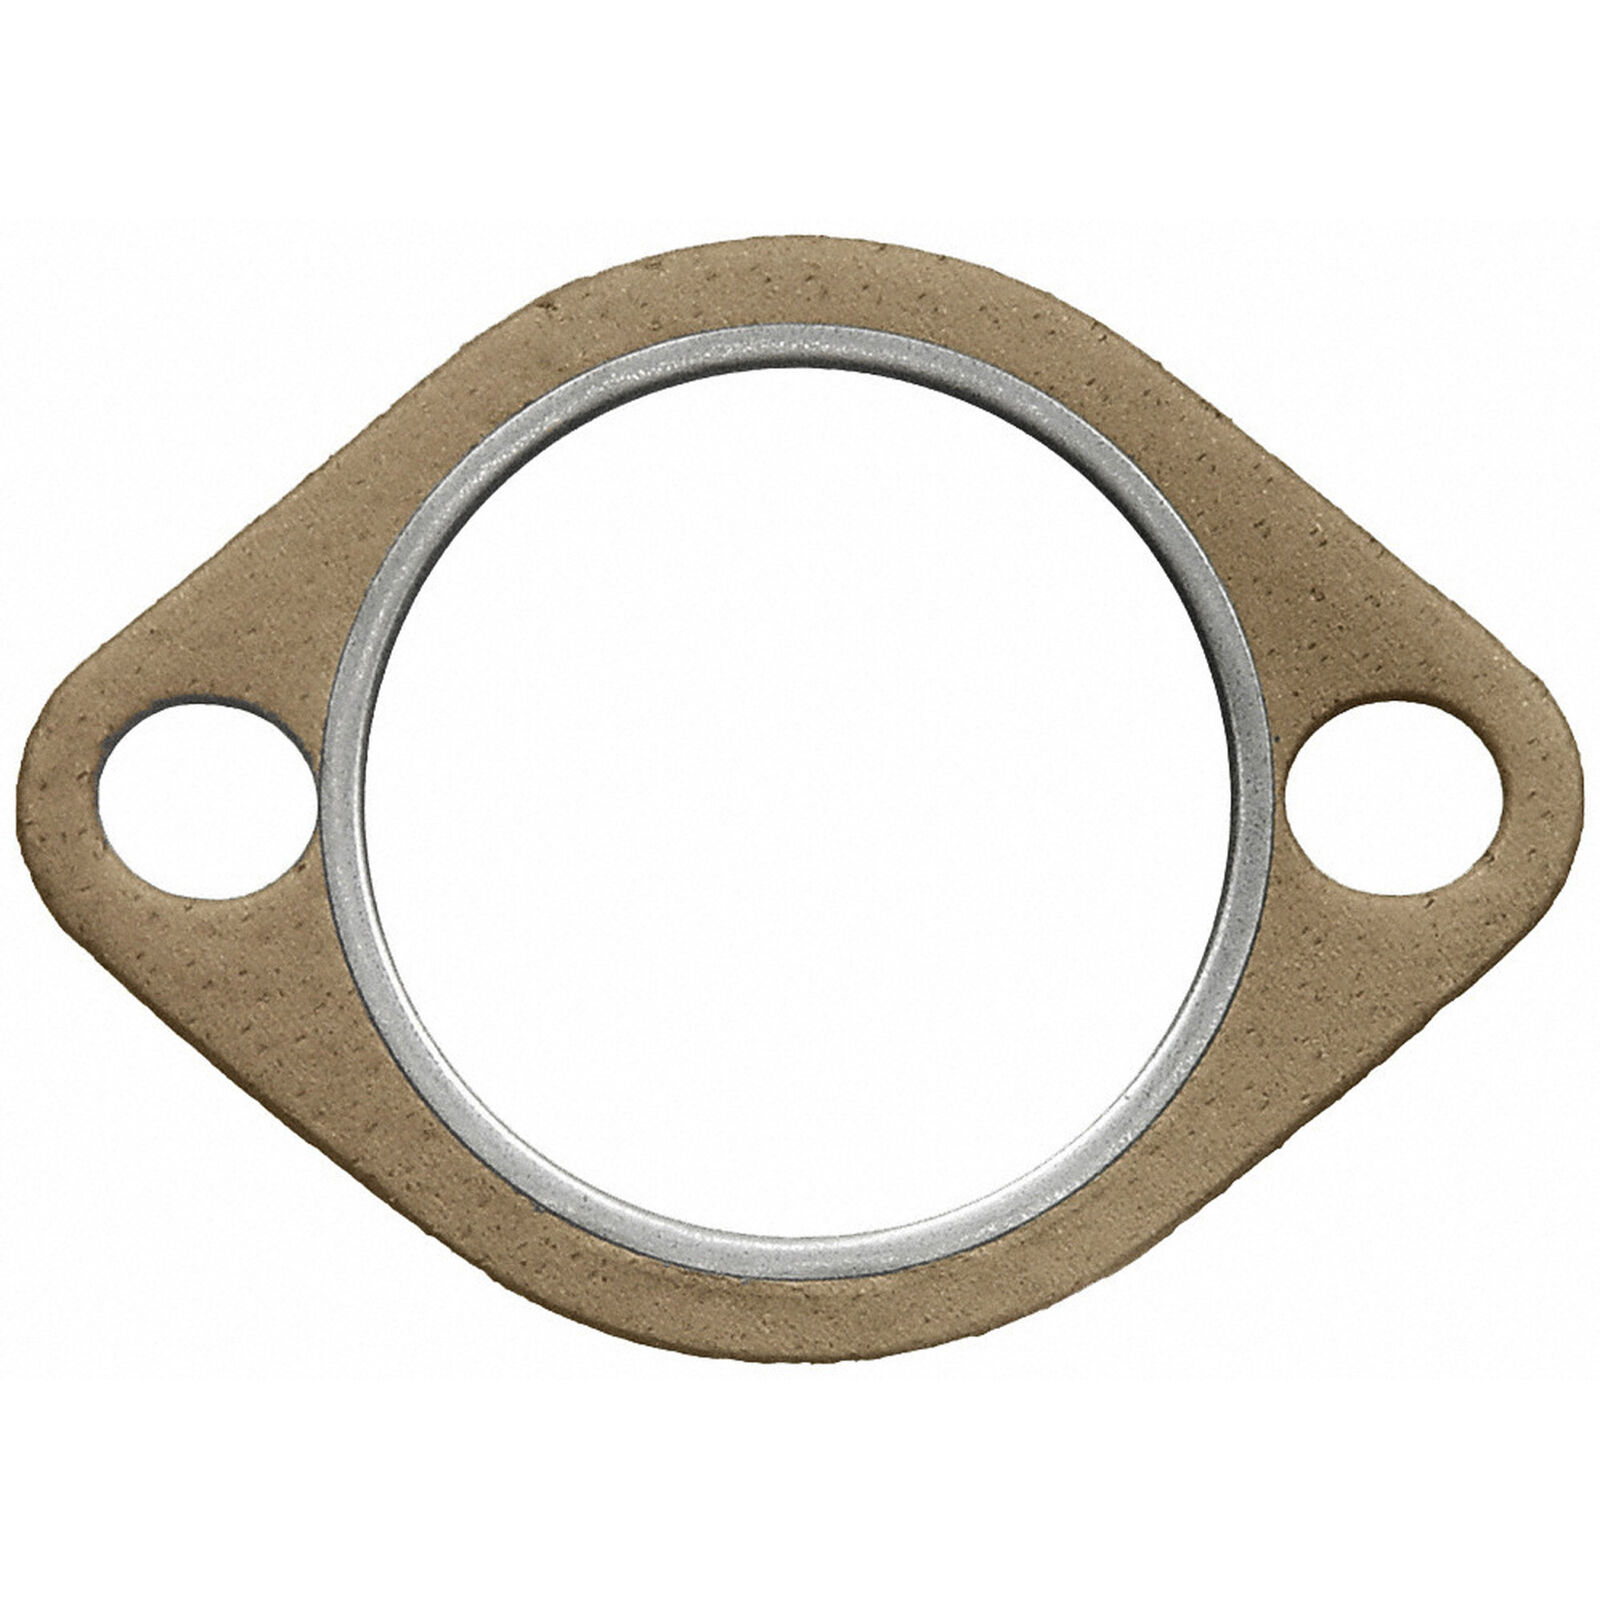 Exhaust Crossover Gasket for 428, Shelby Cobra, Country Sedan+More 60052